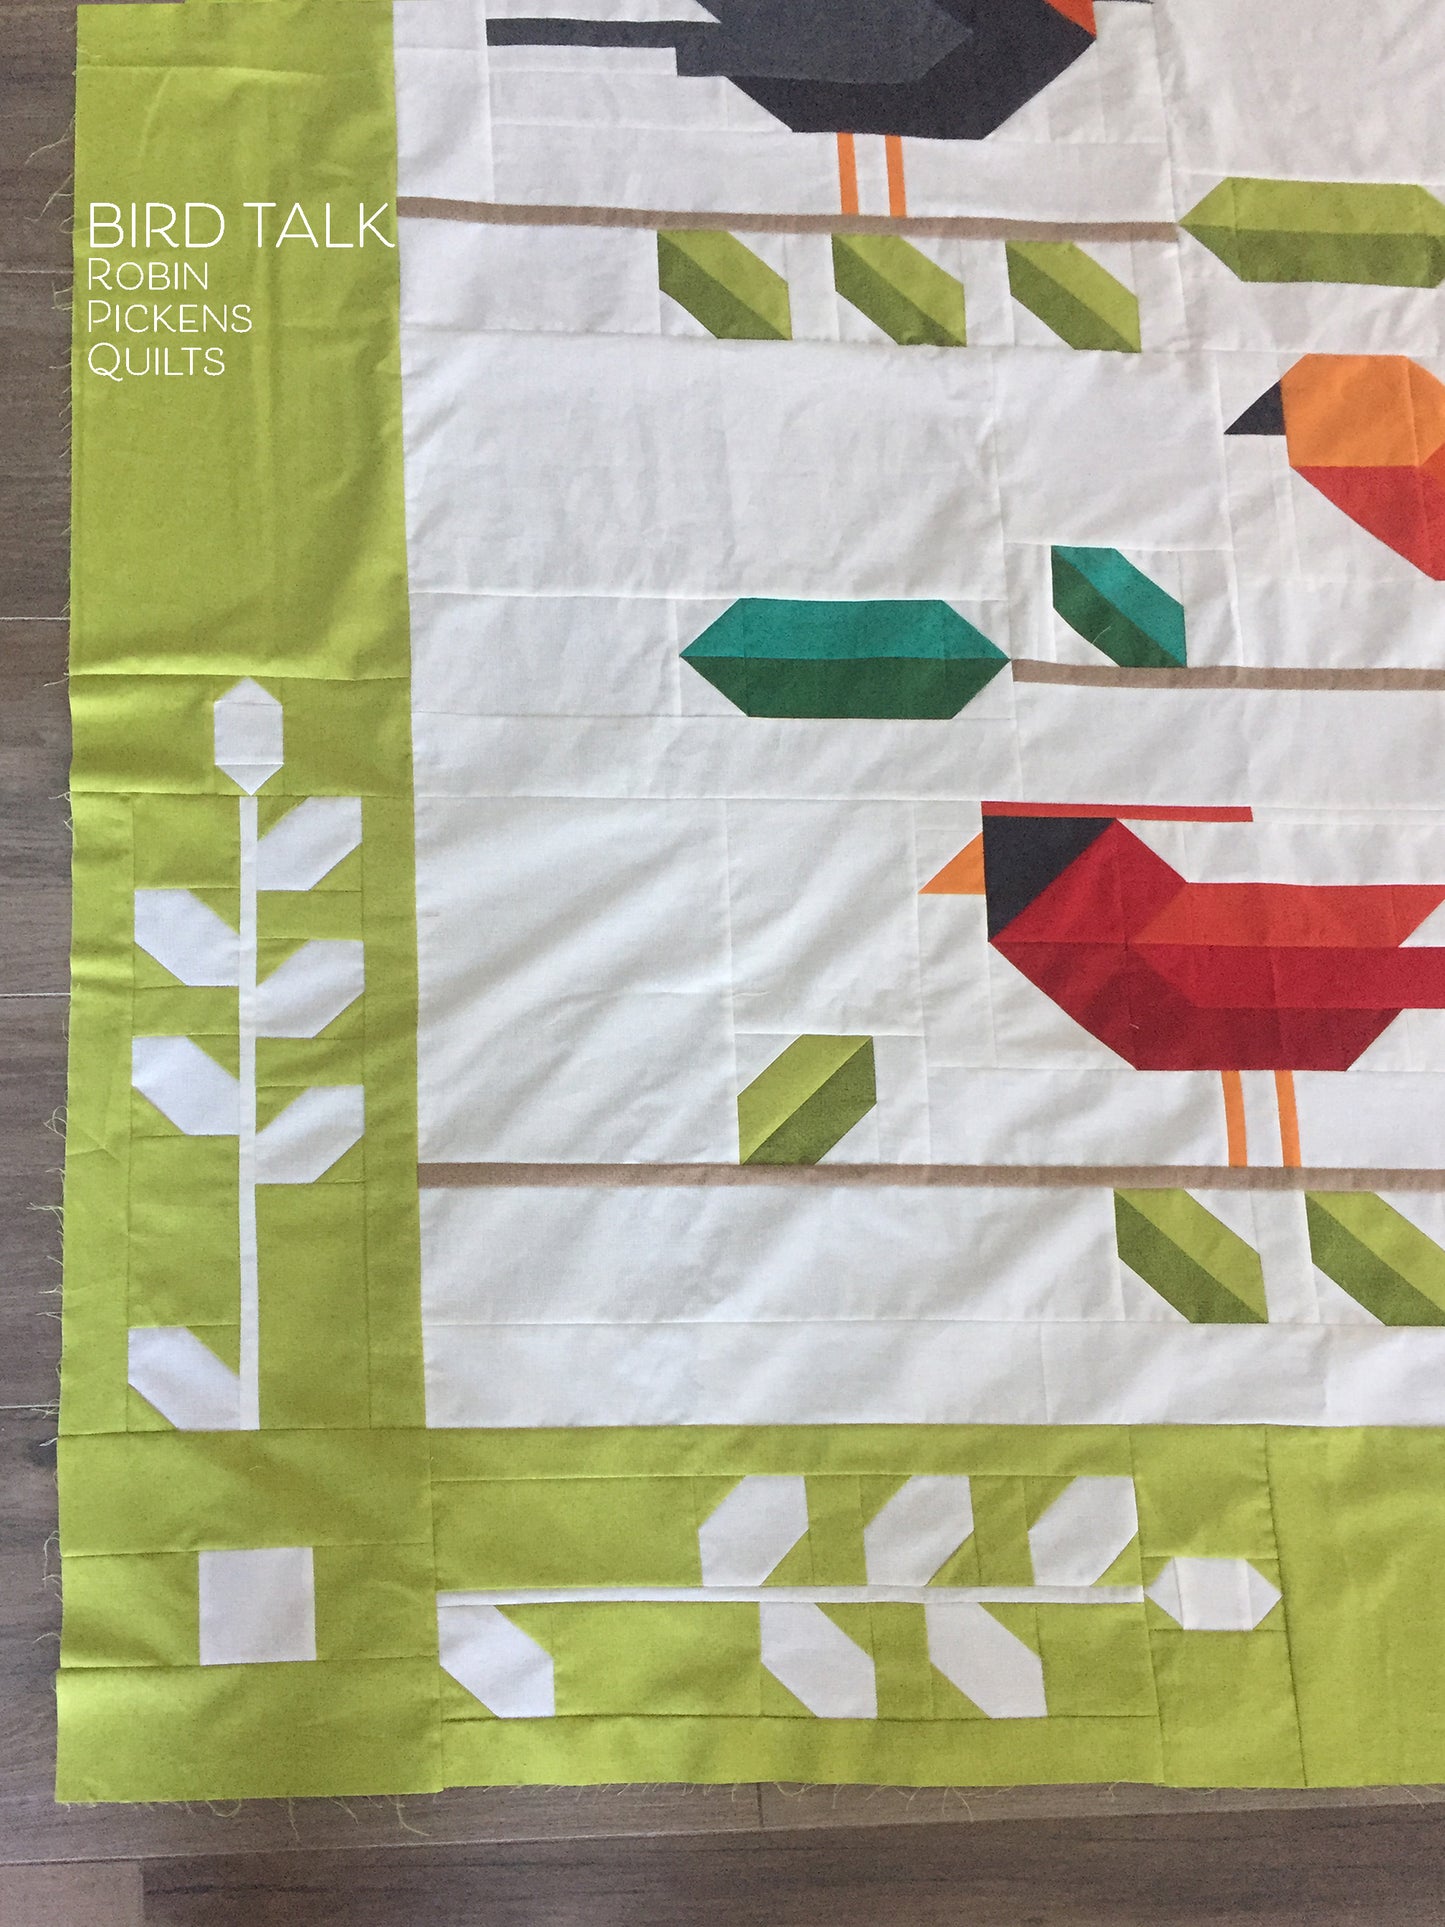 BIRD TALK Quilt Pattern Printed Booklet by Robin Pickens, Lap or Twin size